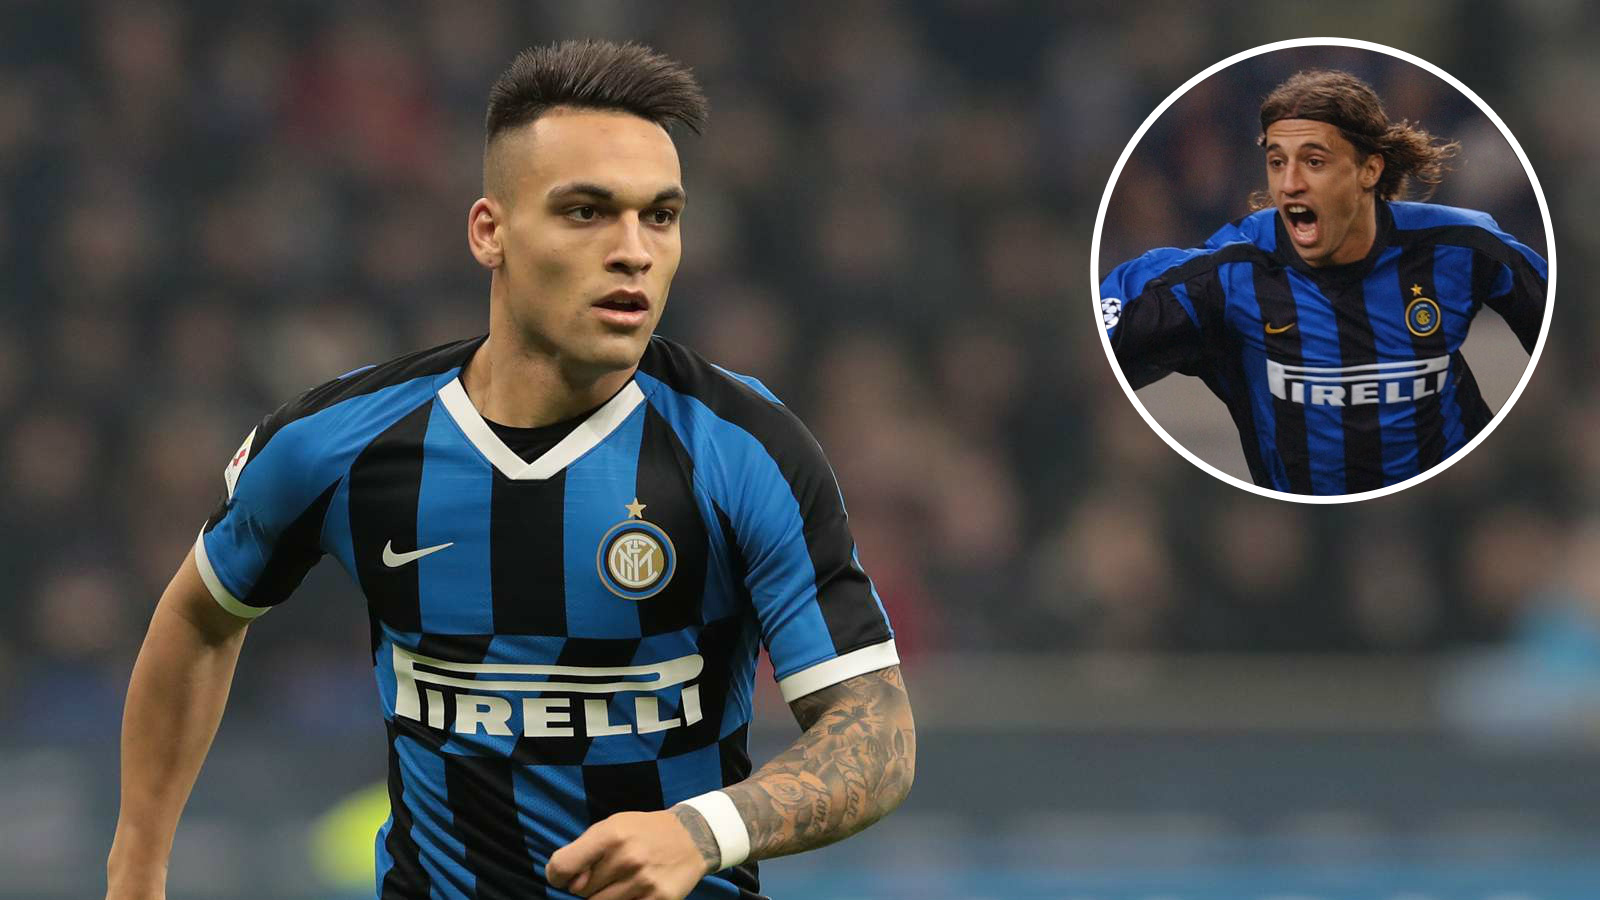 Crespo Believes Lautaro Martinez Is Better Off at Inter Than at Barcelona